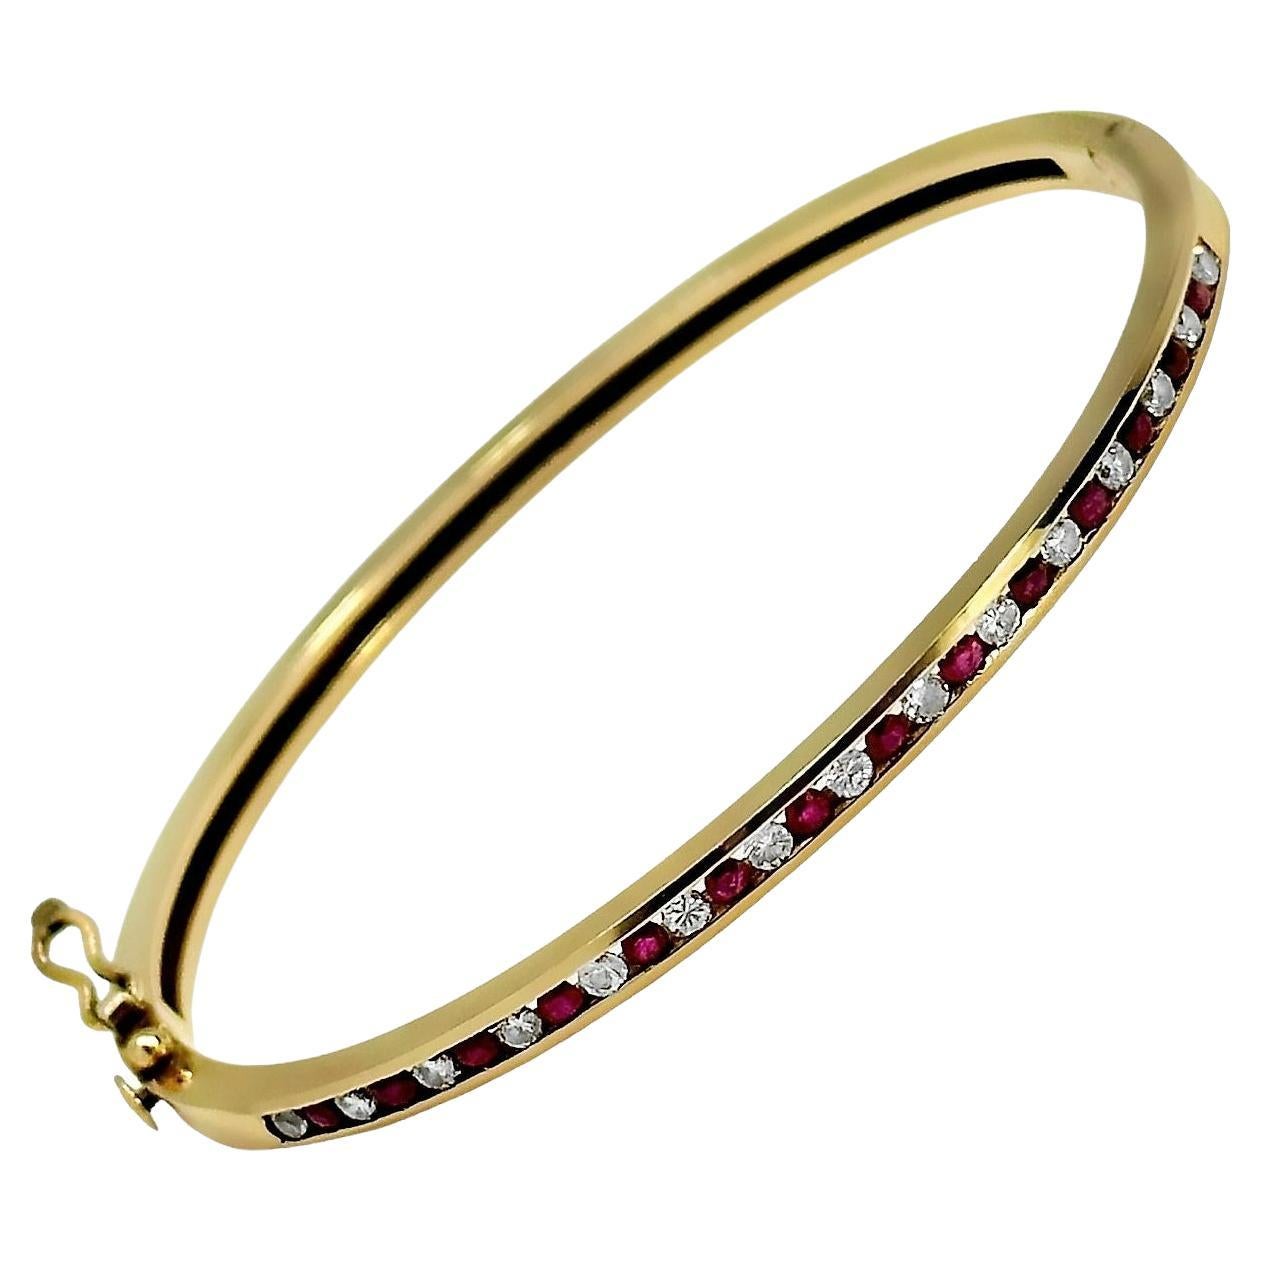 This expertly crafted late-20th Century hinged bangle bracelet is precision channel set with one straight line of alternating brilliant cut diamonds and bright red natural rubies. Total approximate diamond weight is .50ct and total approximate ruby